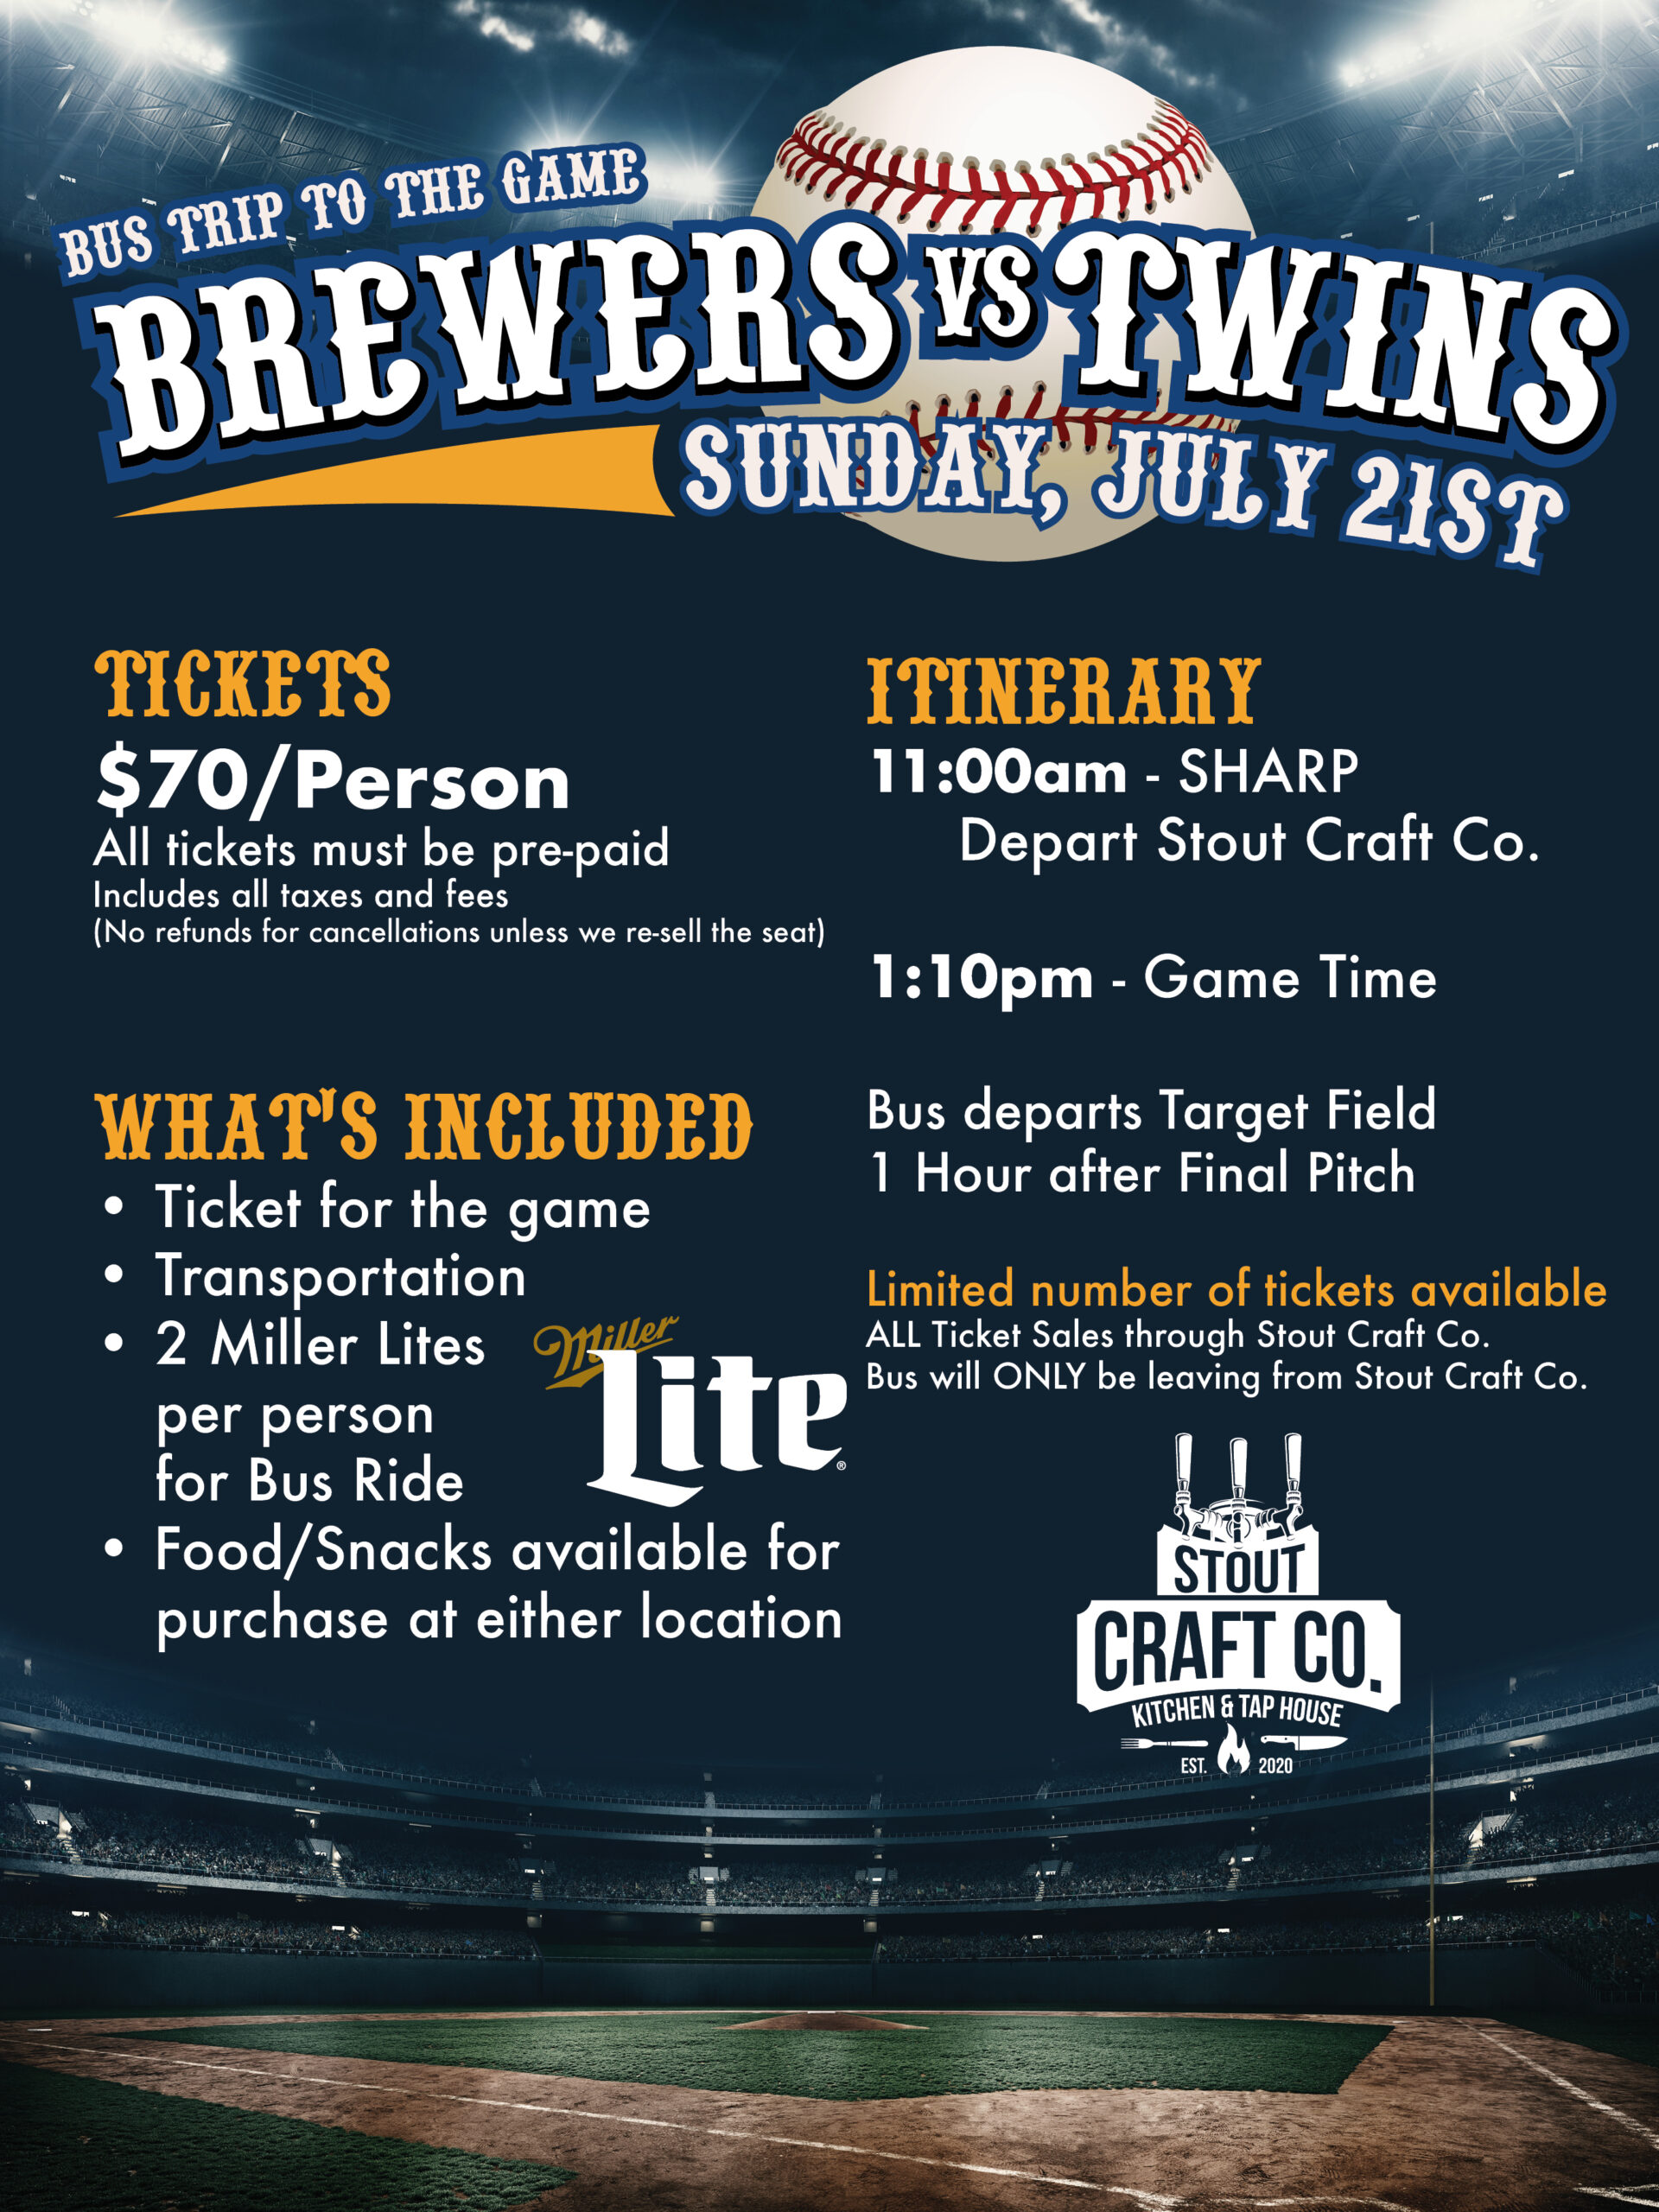 Brewers Twins Bus Trip Game